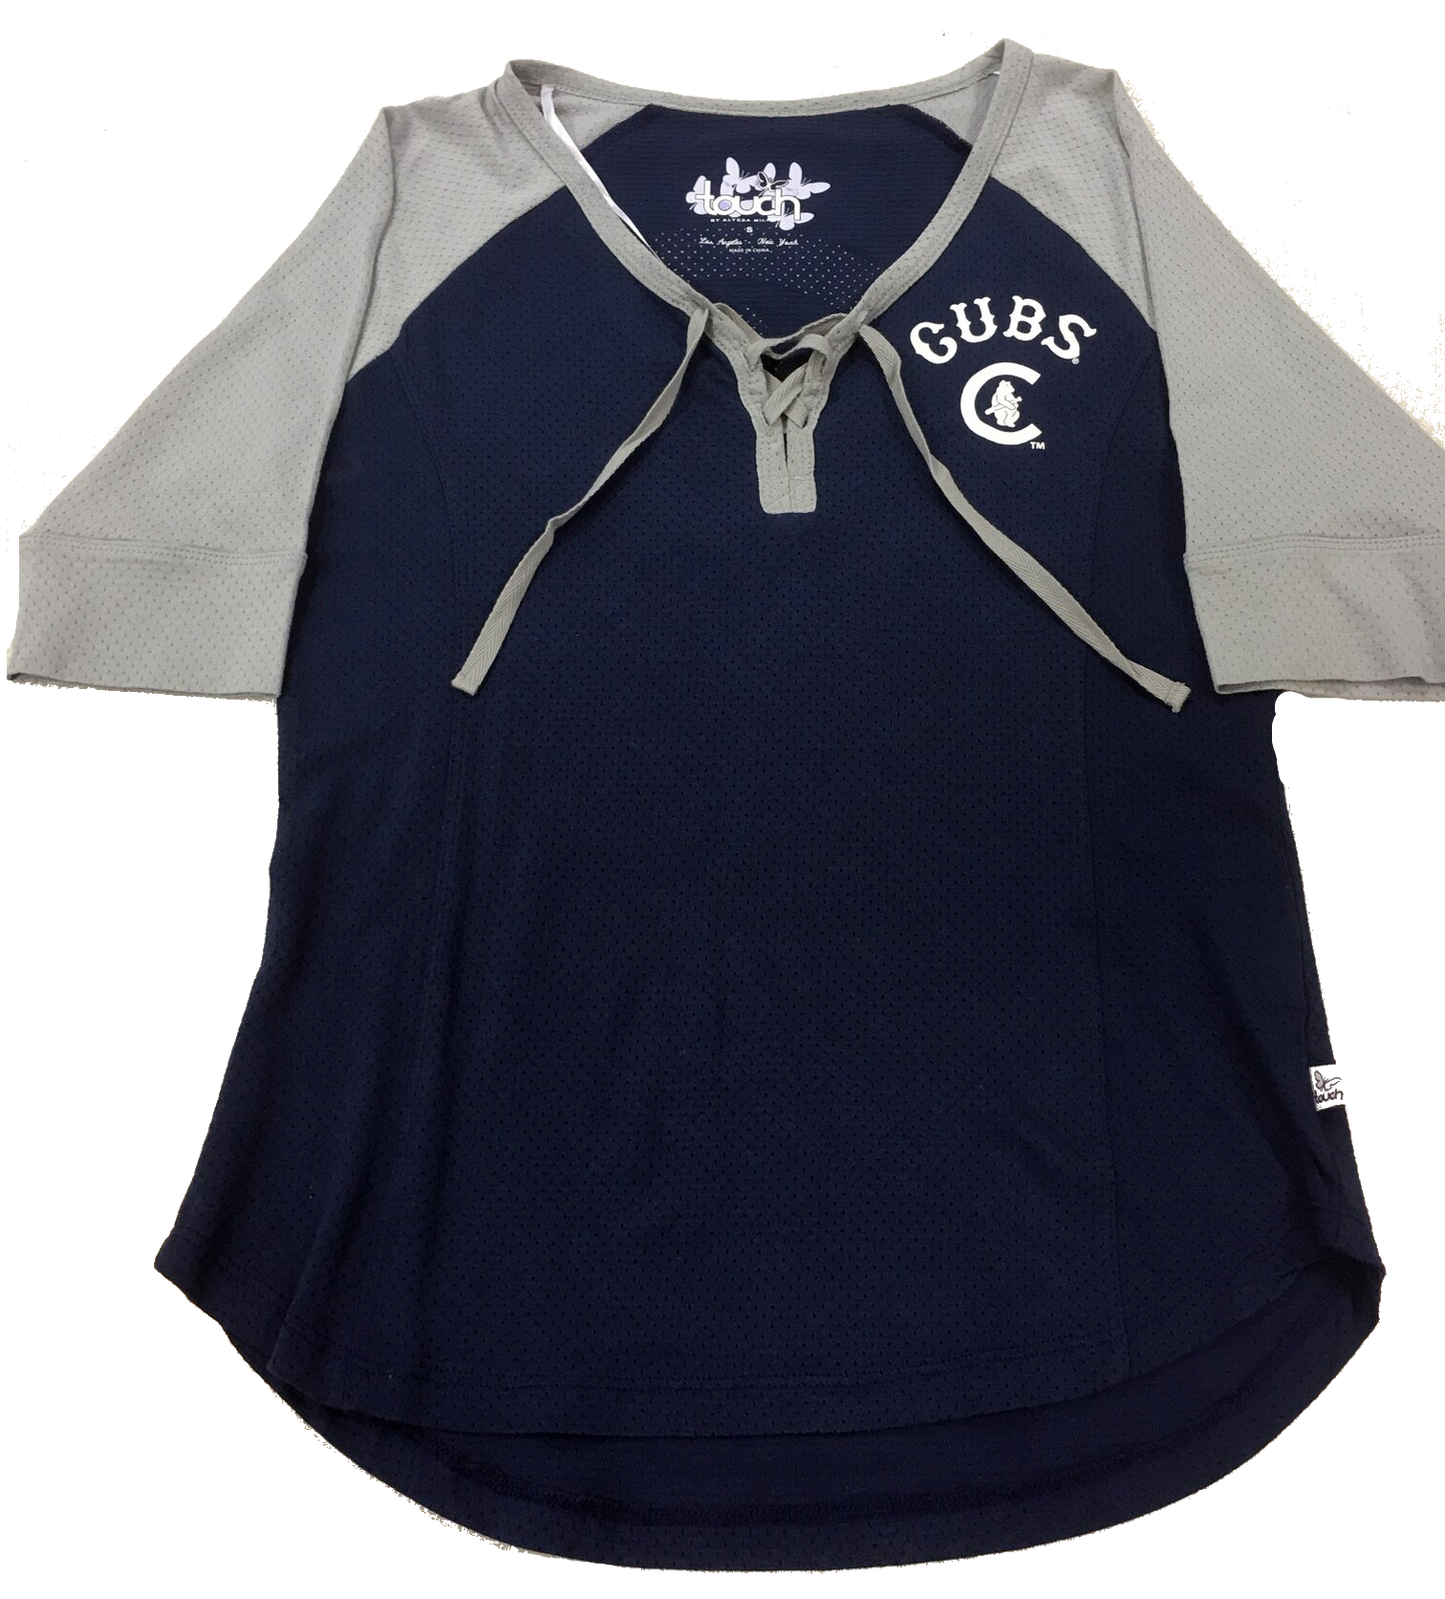 Women’s Chicago Cubs Navy/Gray Perfect Game Top